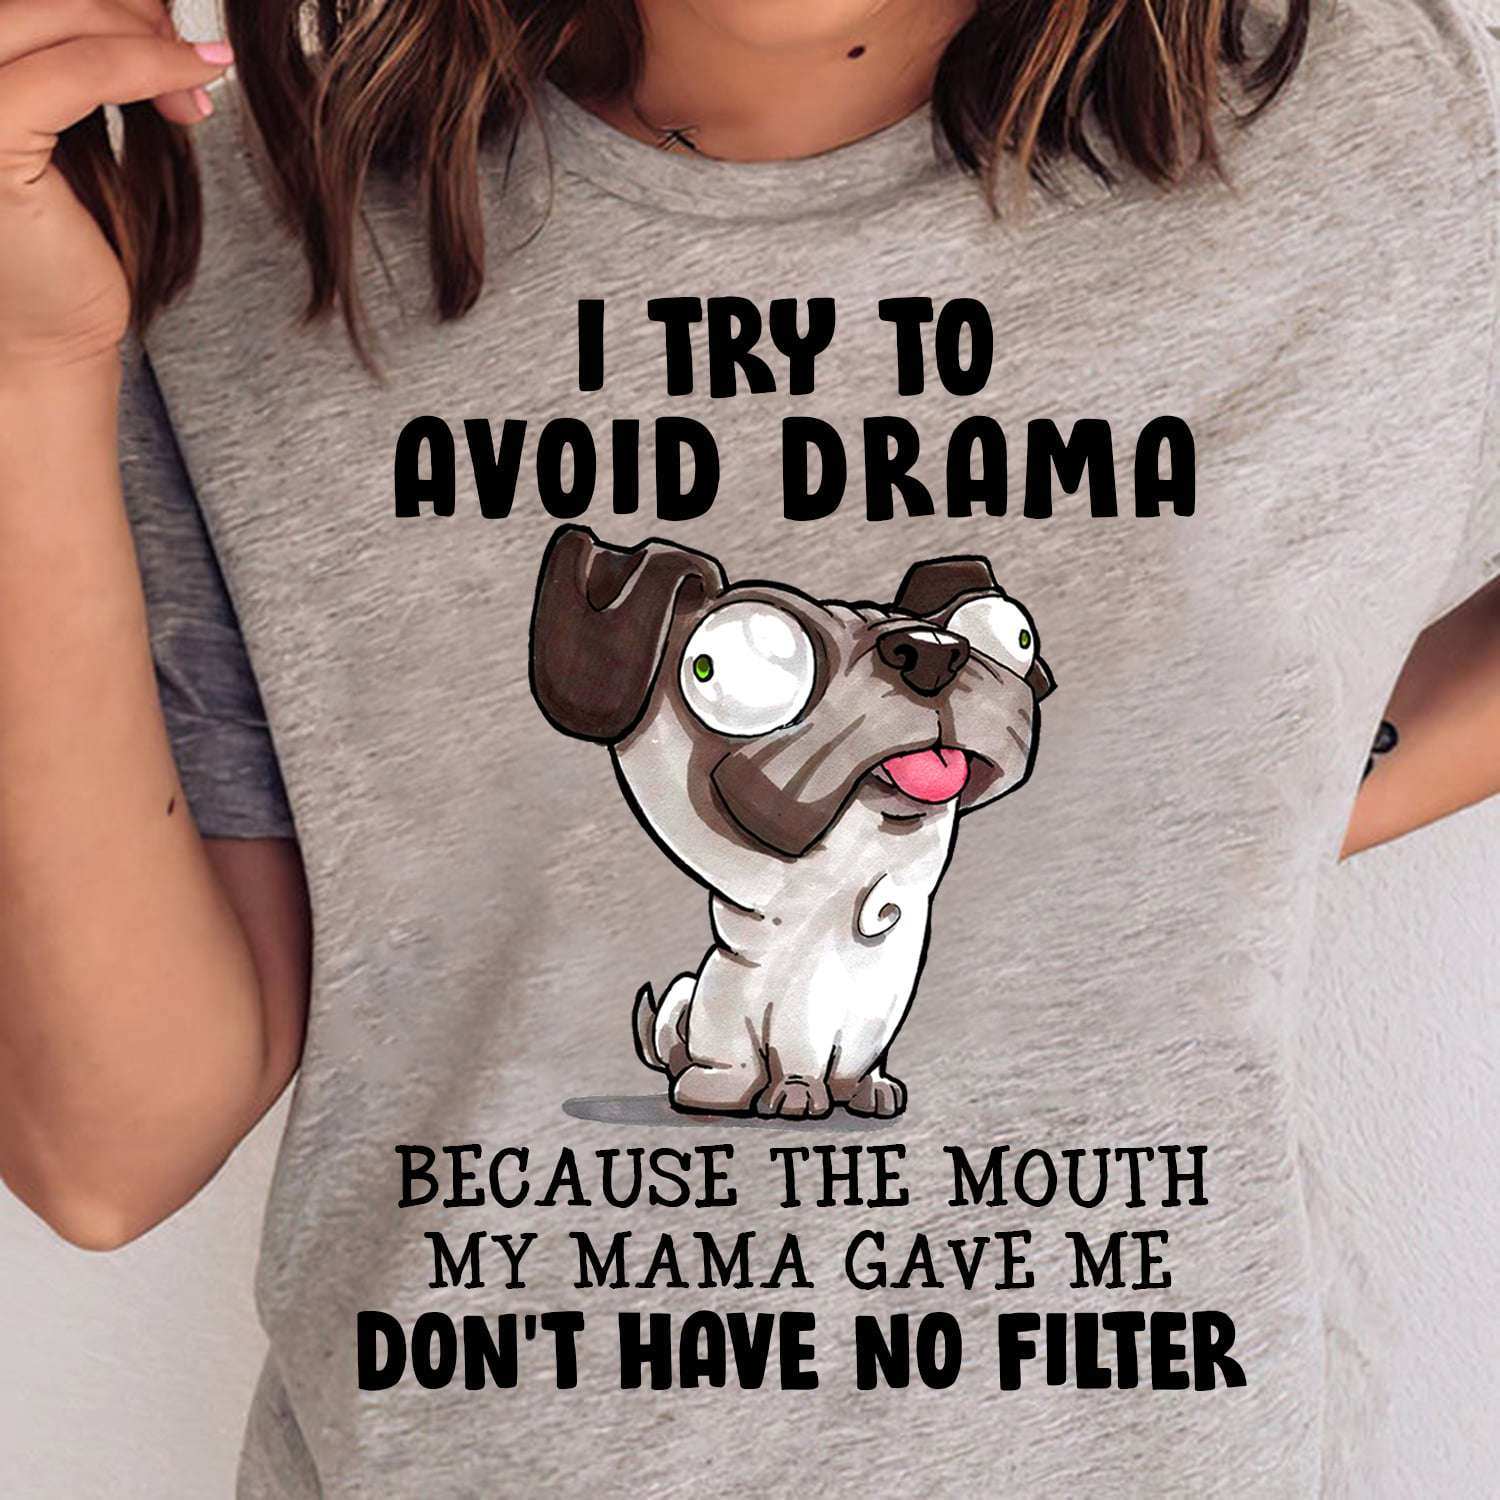 I try to avoid drama because the mouth myma gave me don't have no filter - Pug do avoid drama